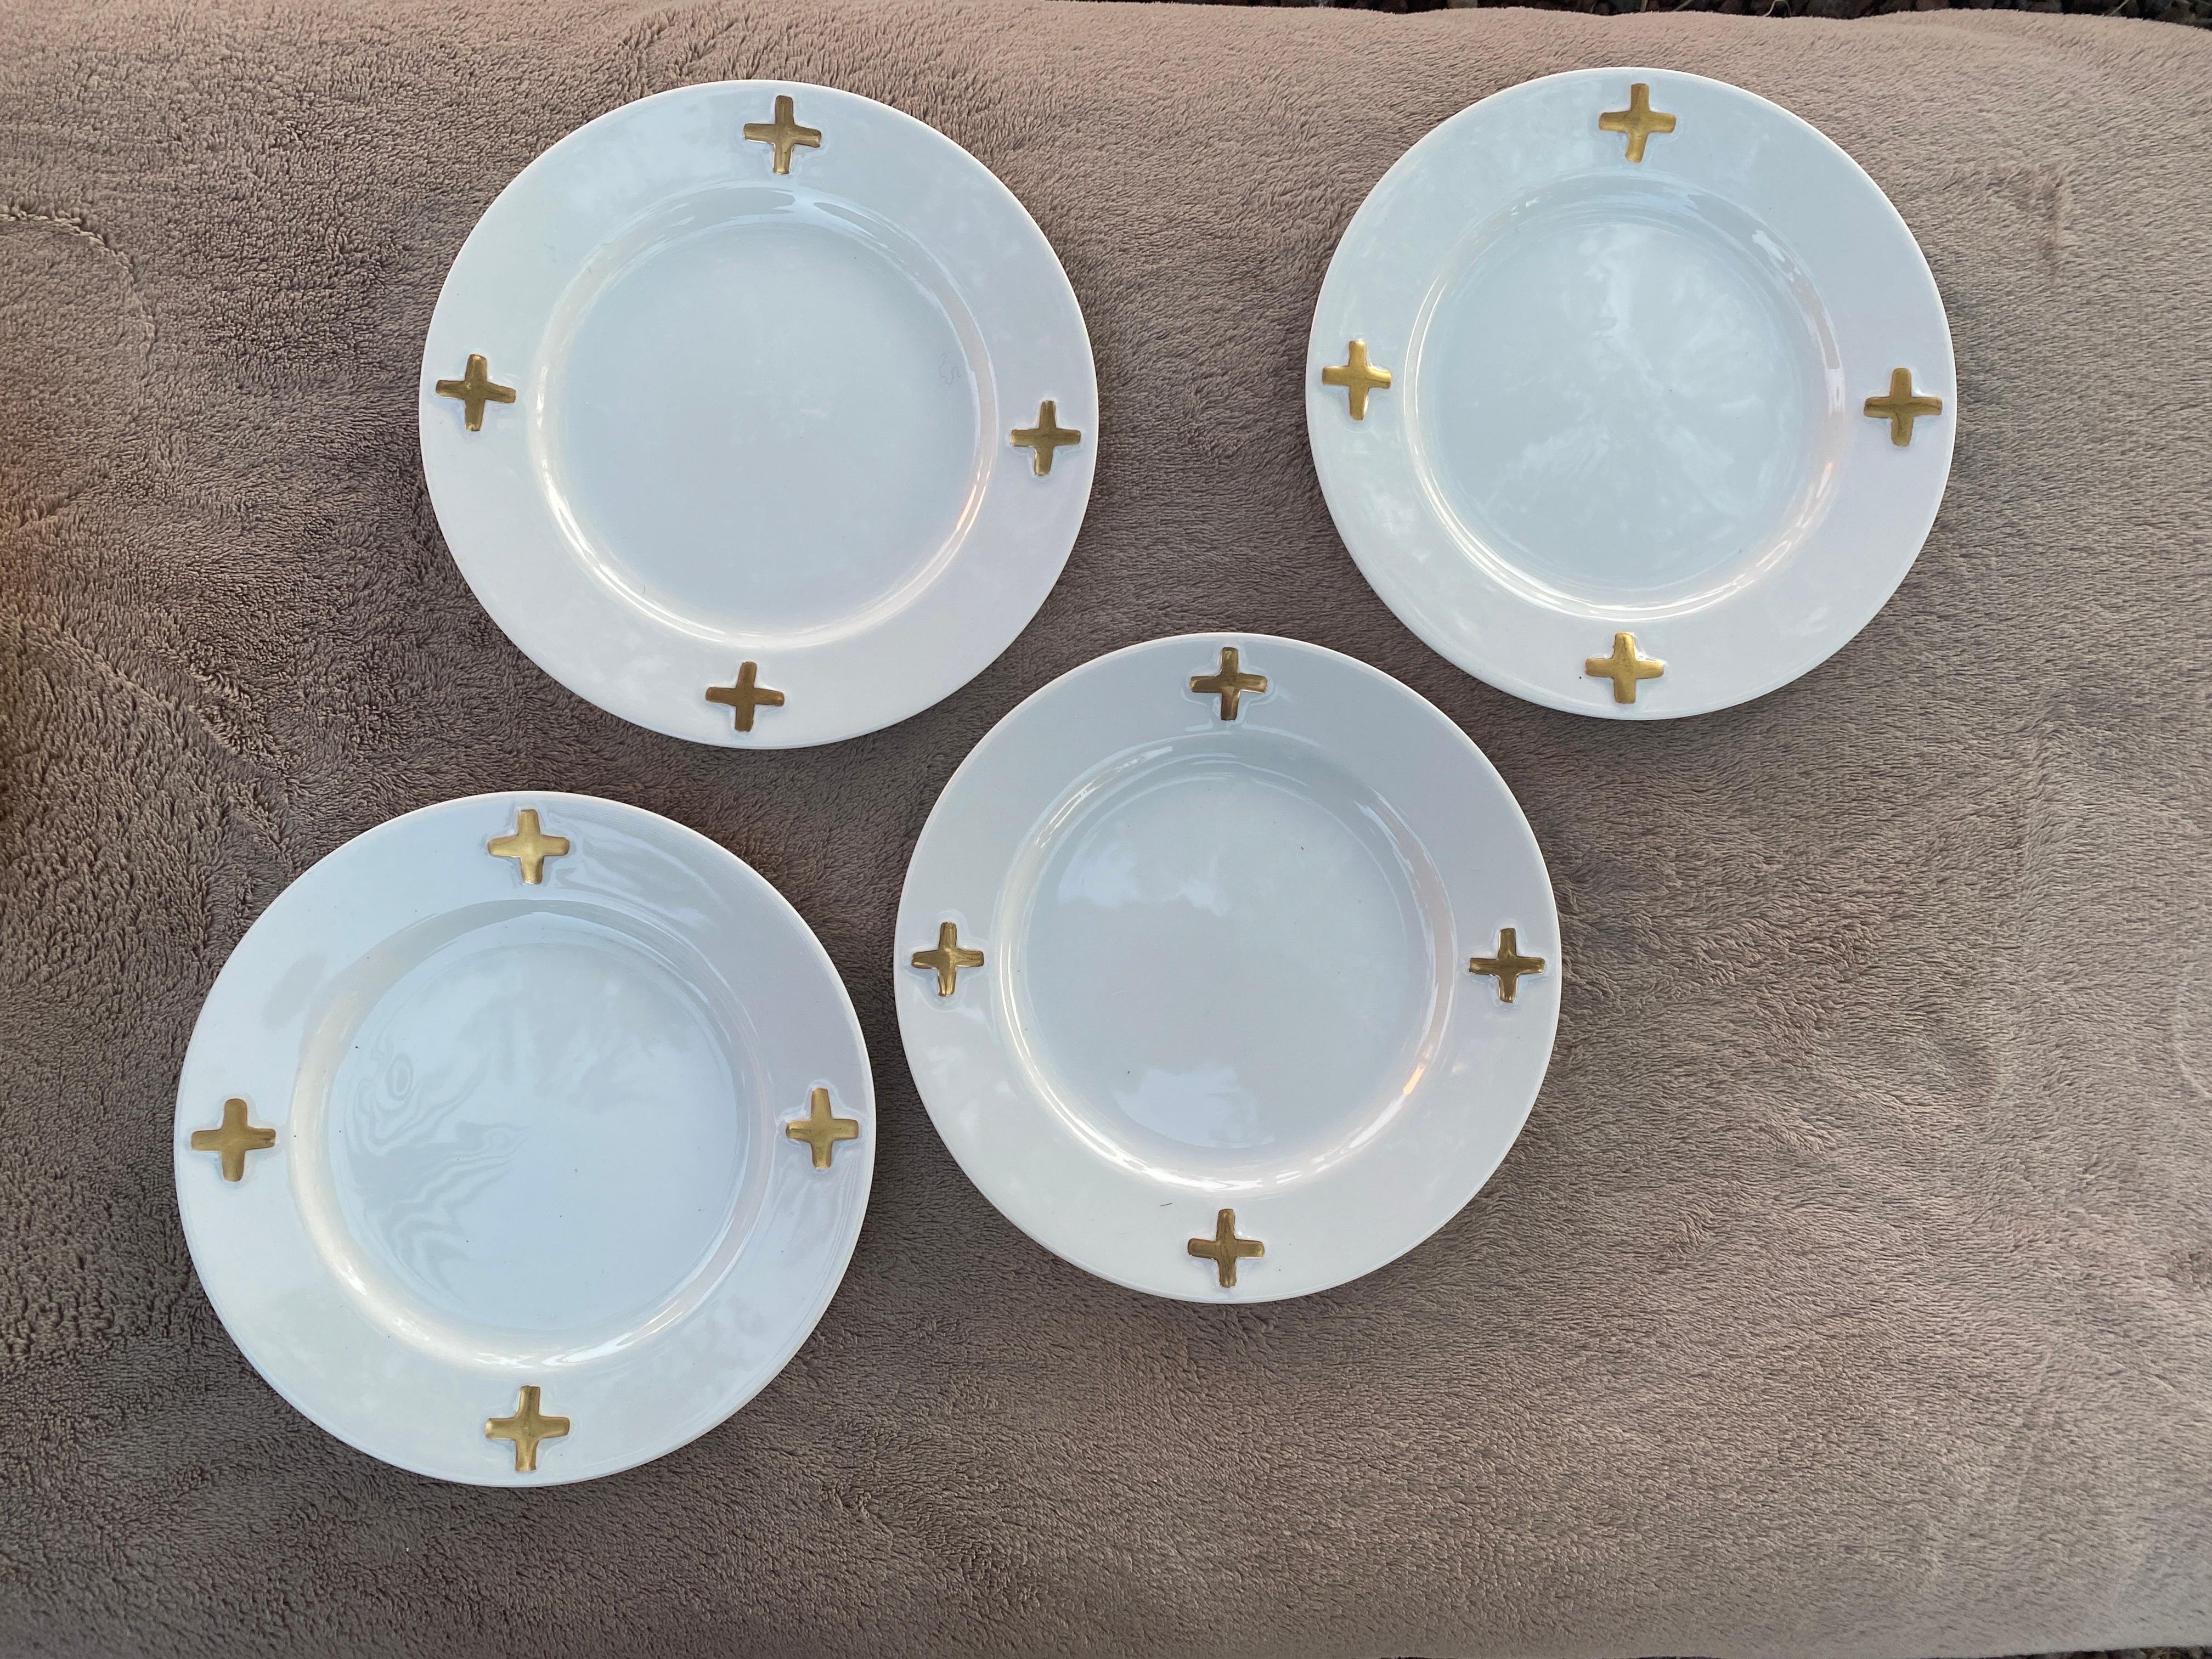 This set of dinnerware lunch plates were designed by the legendary jewelry and fine art designer, Robert Lee Morris for Swid Powell. The pattern name is called Camelot and is a chic, modern design of shiny white with 4 metallic gold crosses. It is